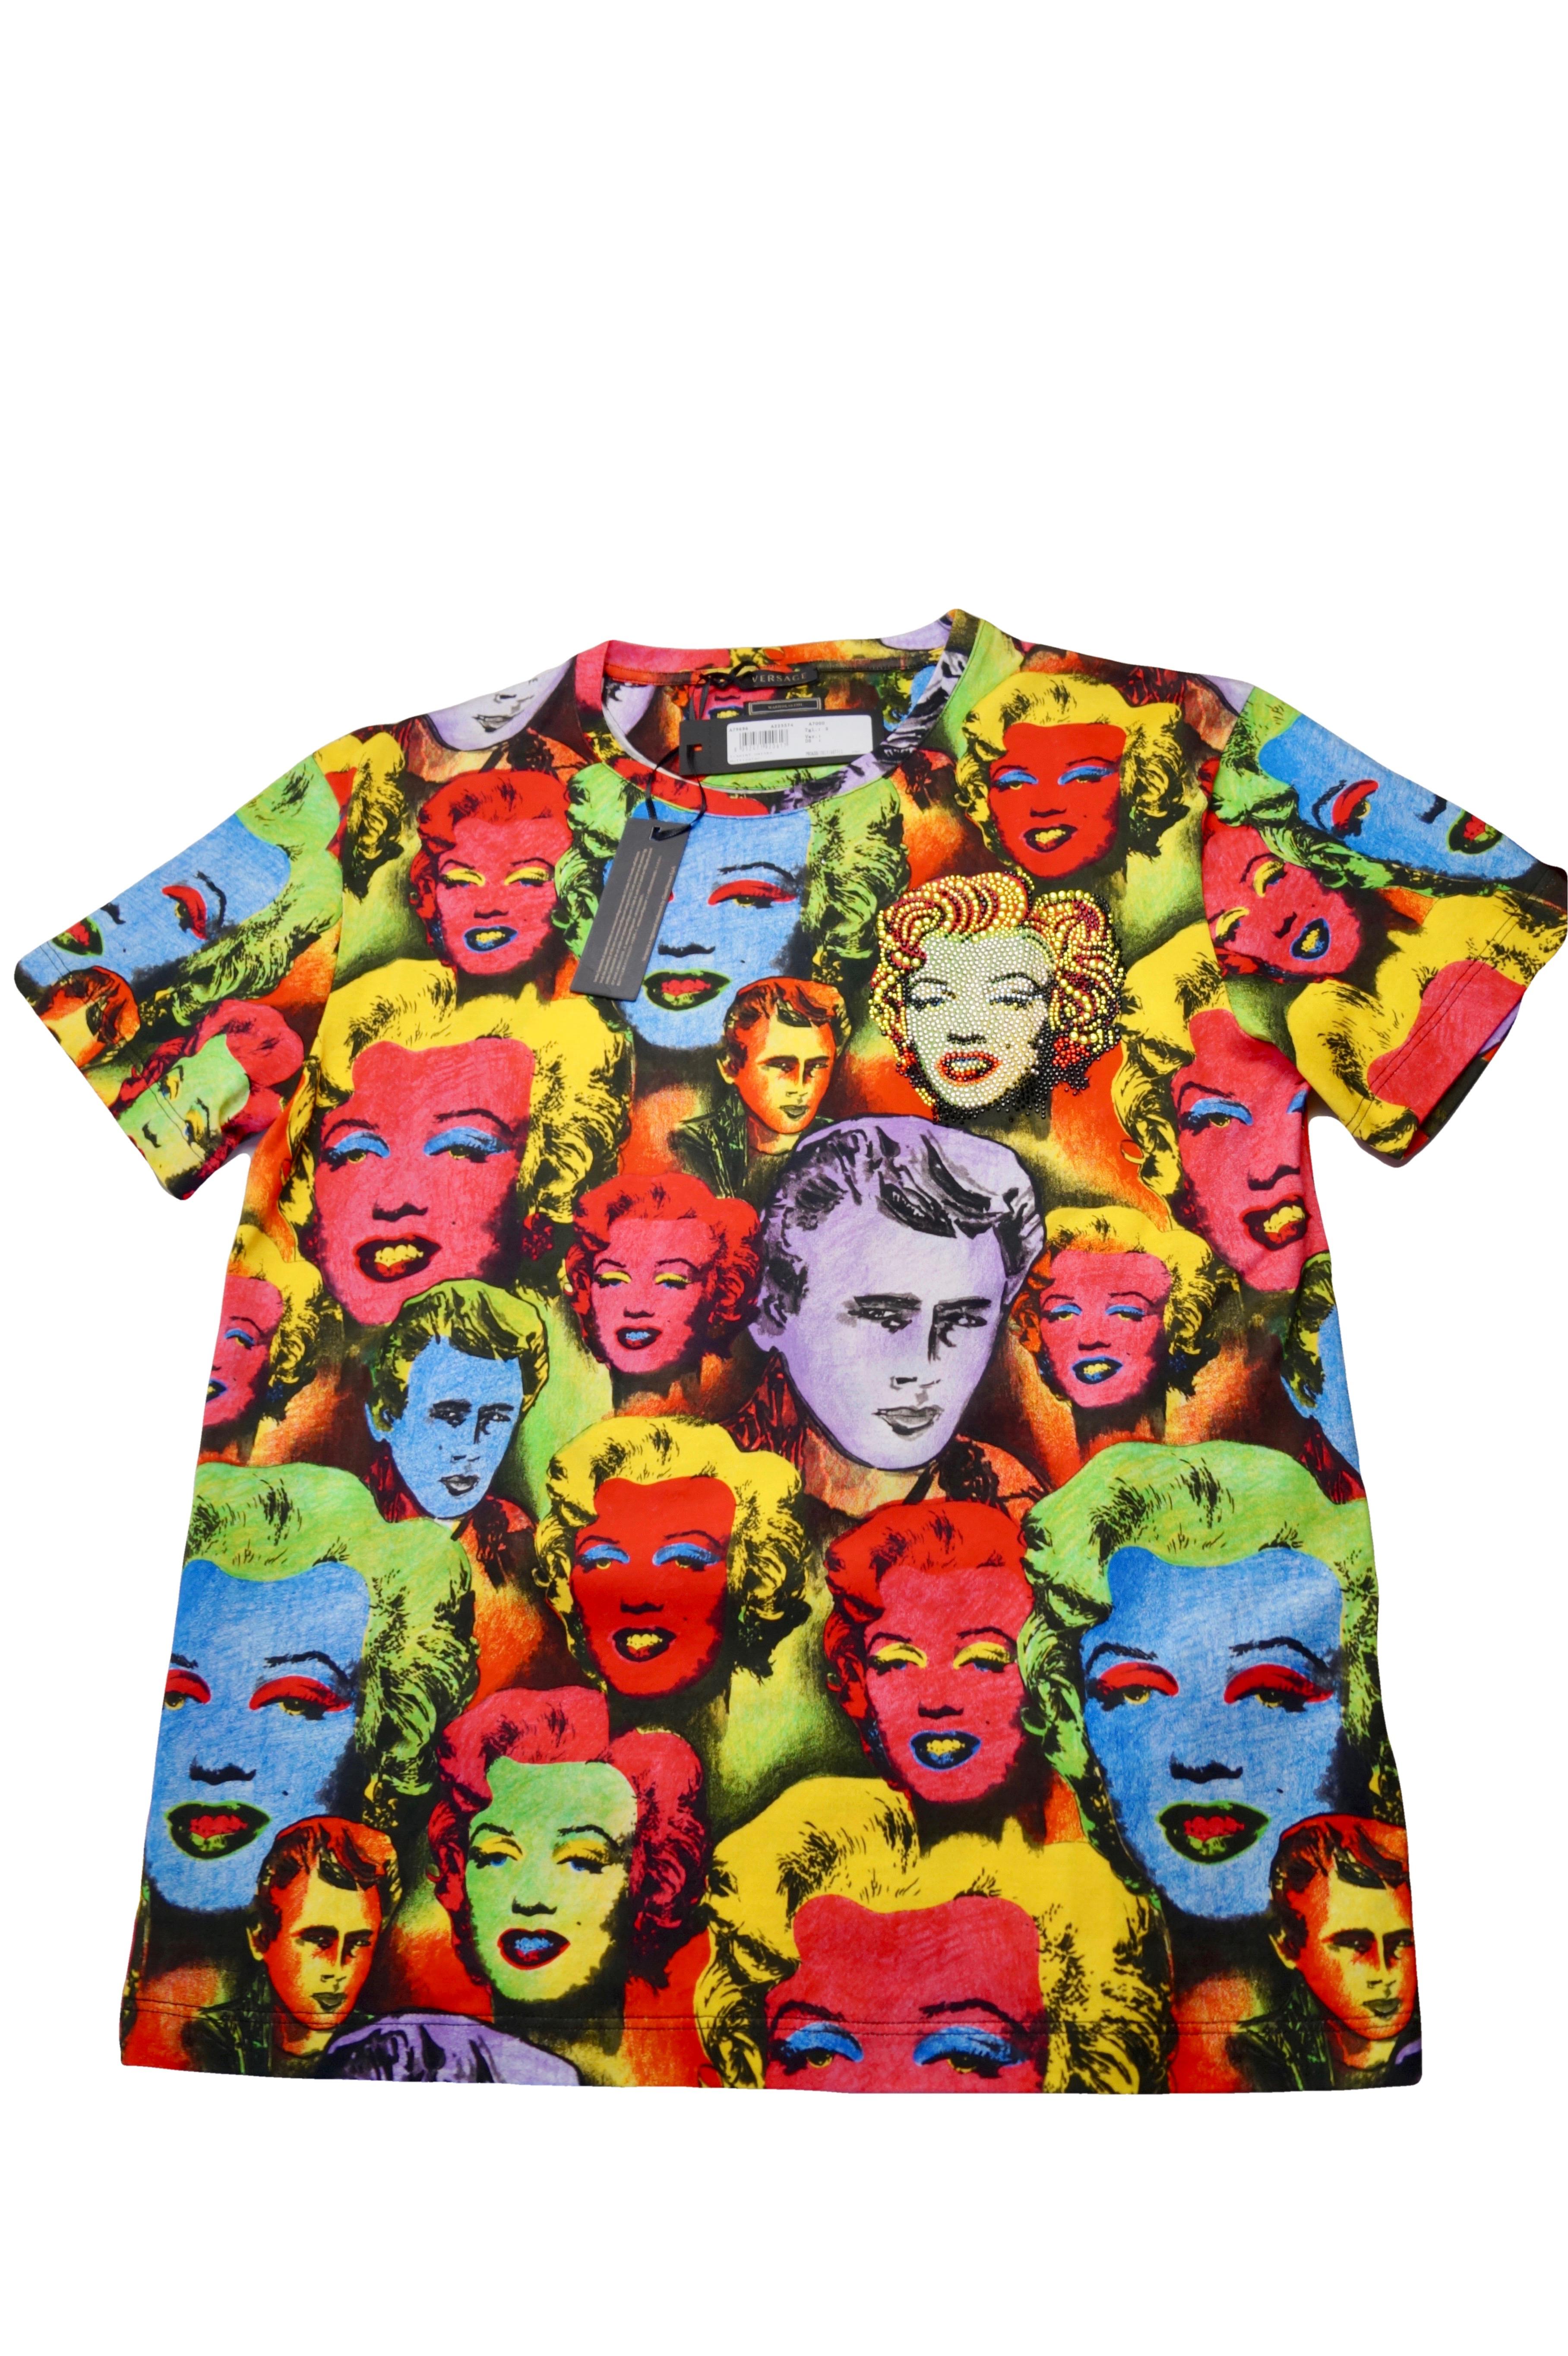 VERSACE Tribute 2017 Warhol SS 1991 Marilyn Monroe and James Dean T-shirt In New Condition For Sale In Rubiera, RE